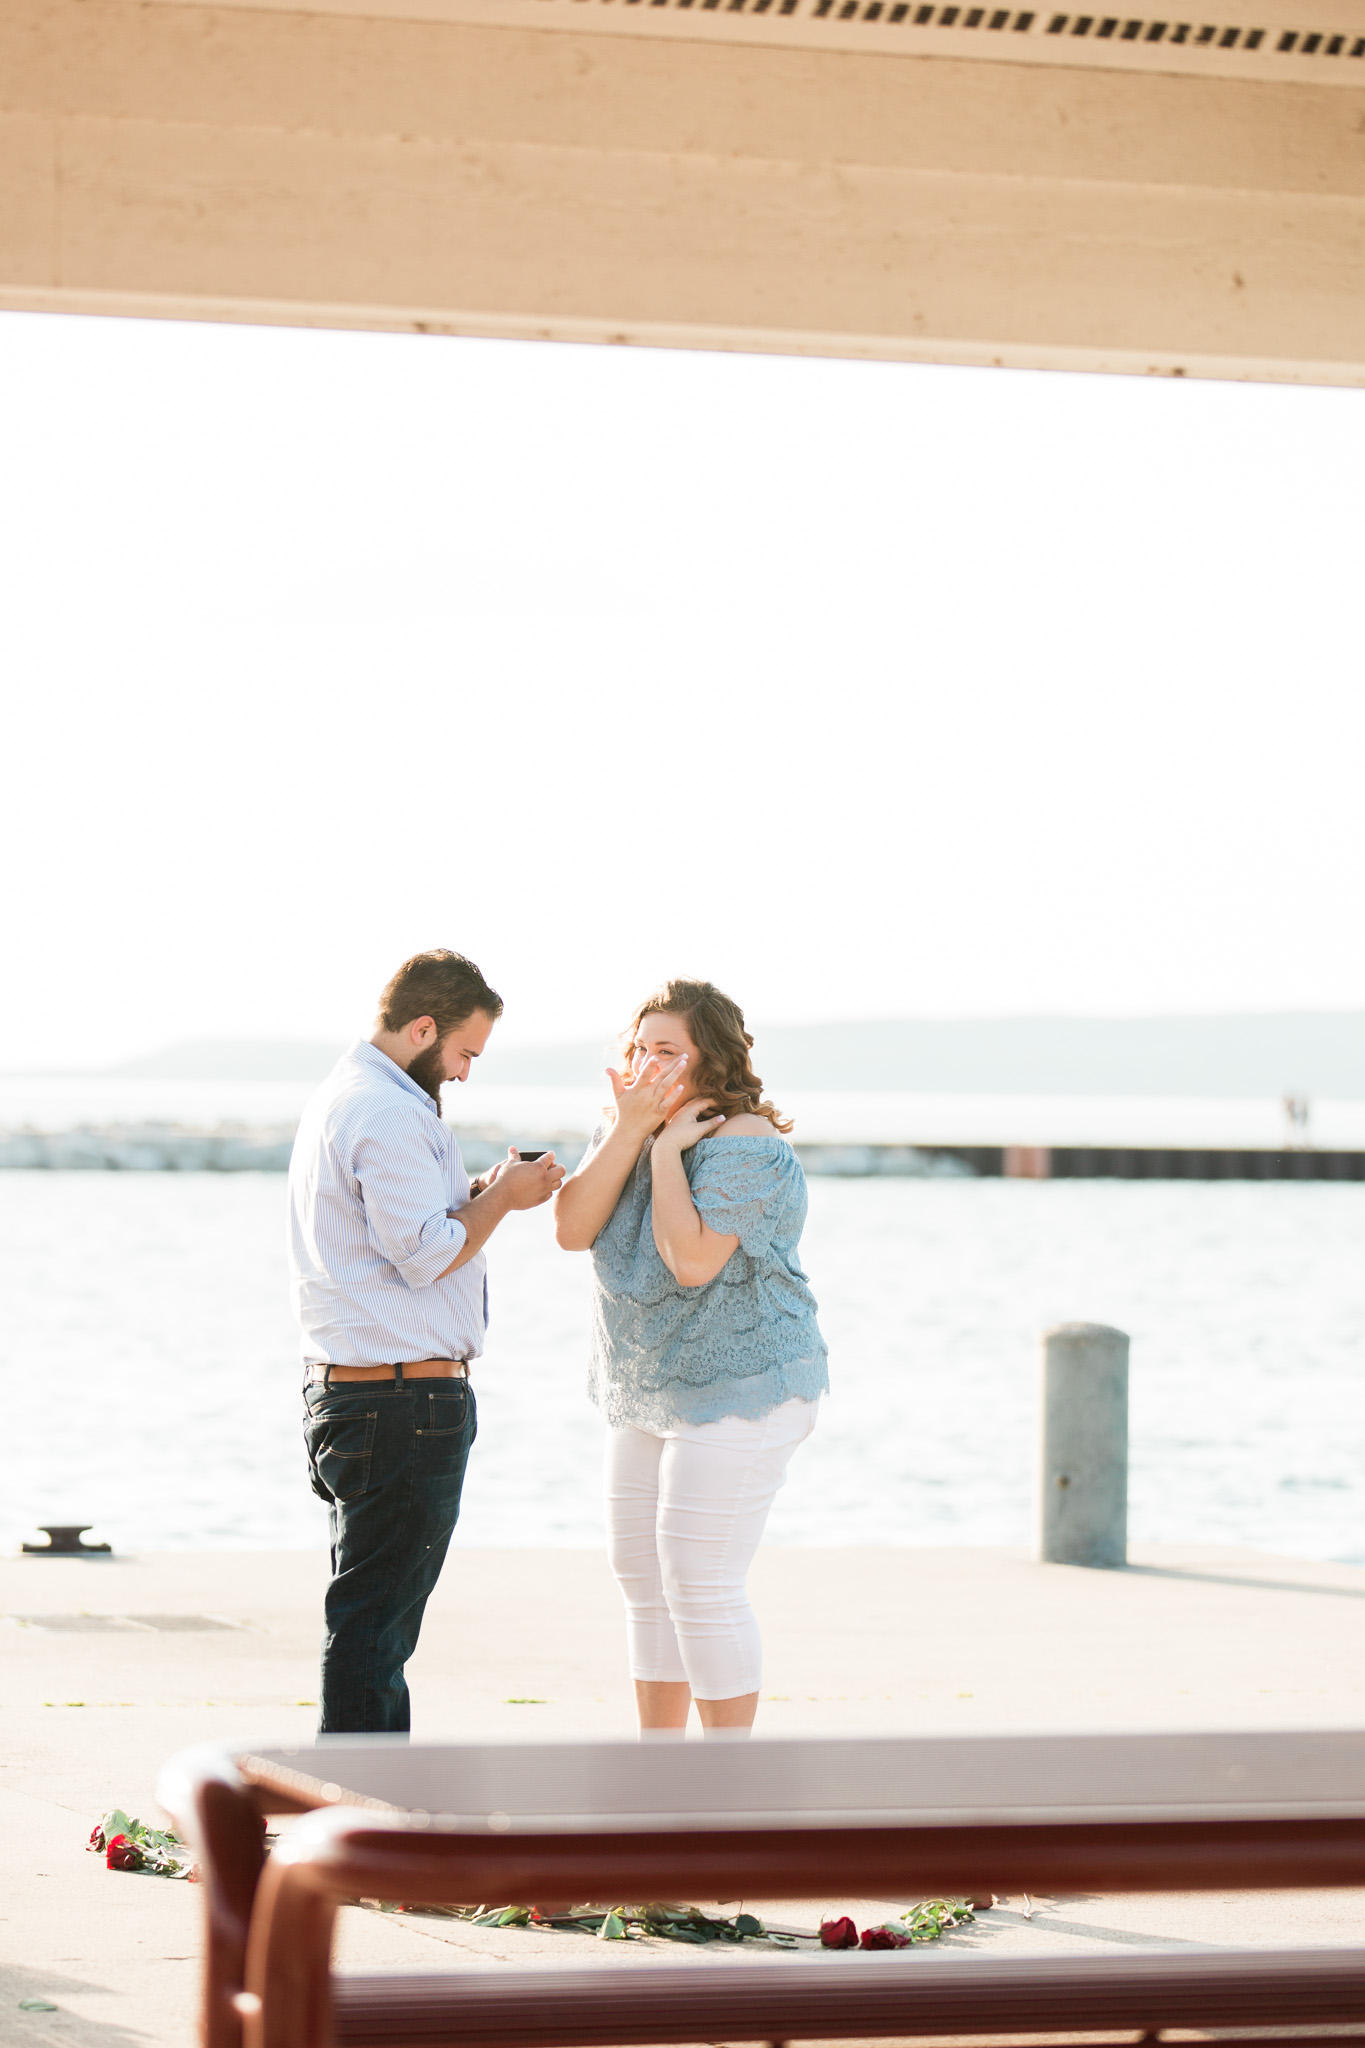 Romantic Petoskey Michigan Proposal on the Pier with Rose Trail | How He Asked | She Said Yes | Laurenda Marie Photography